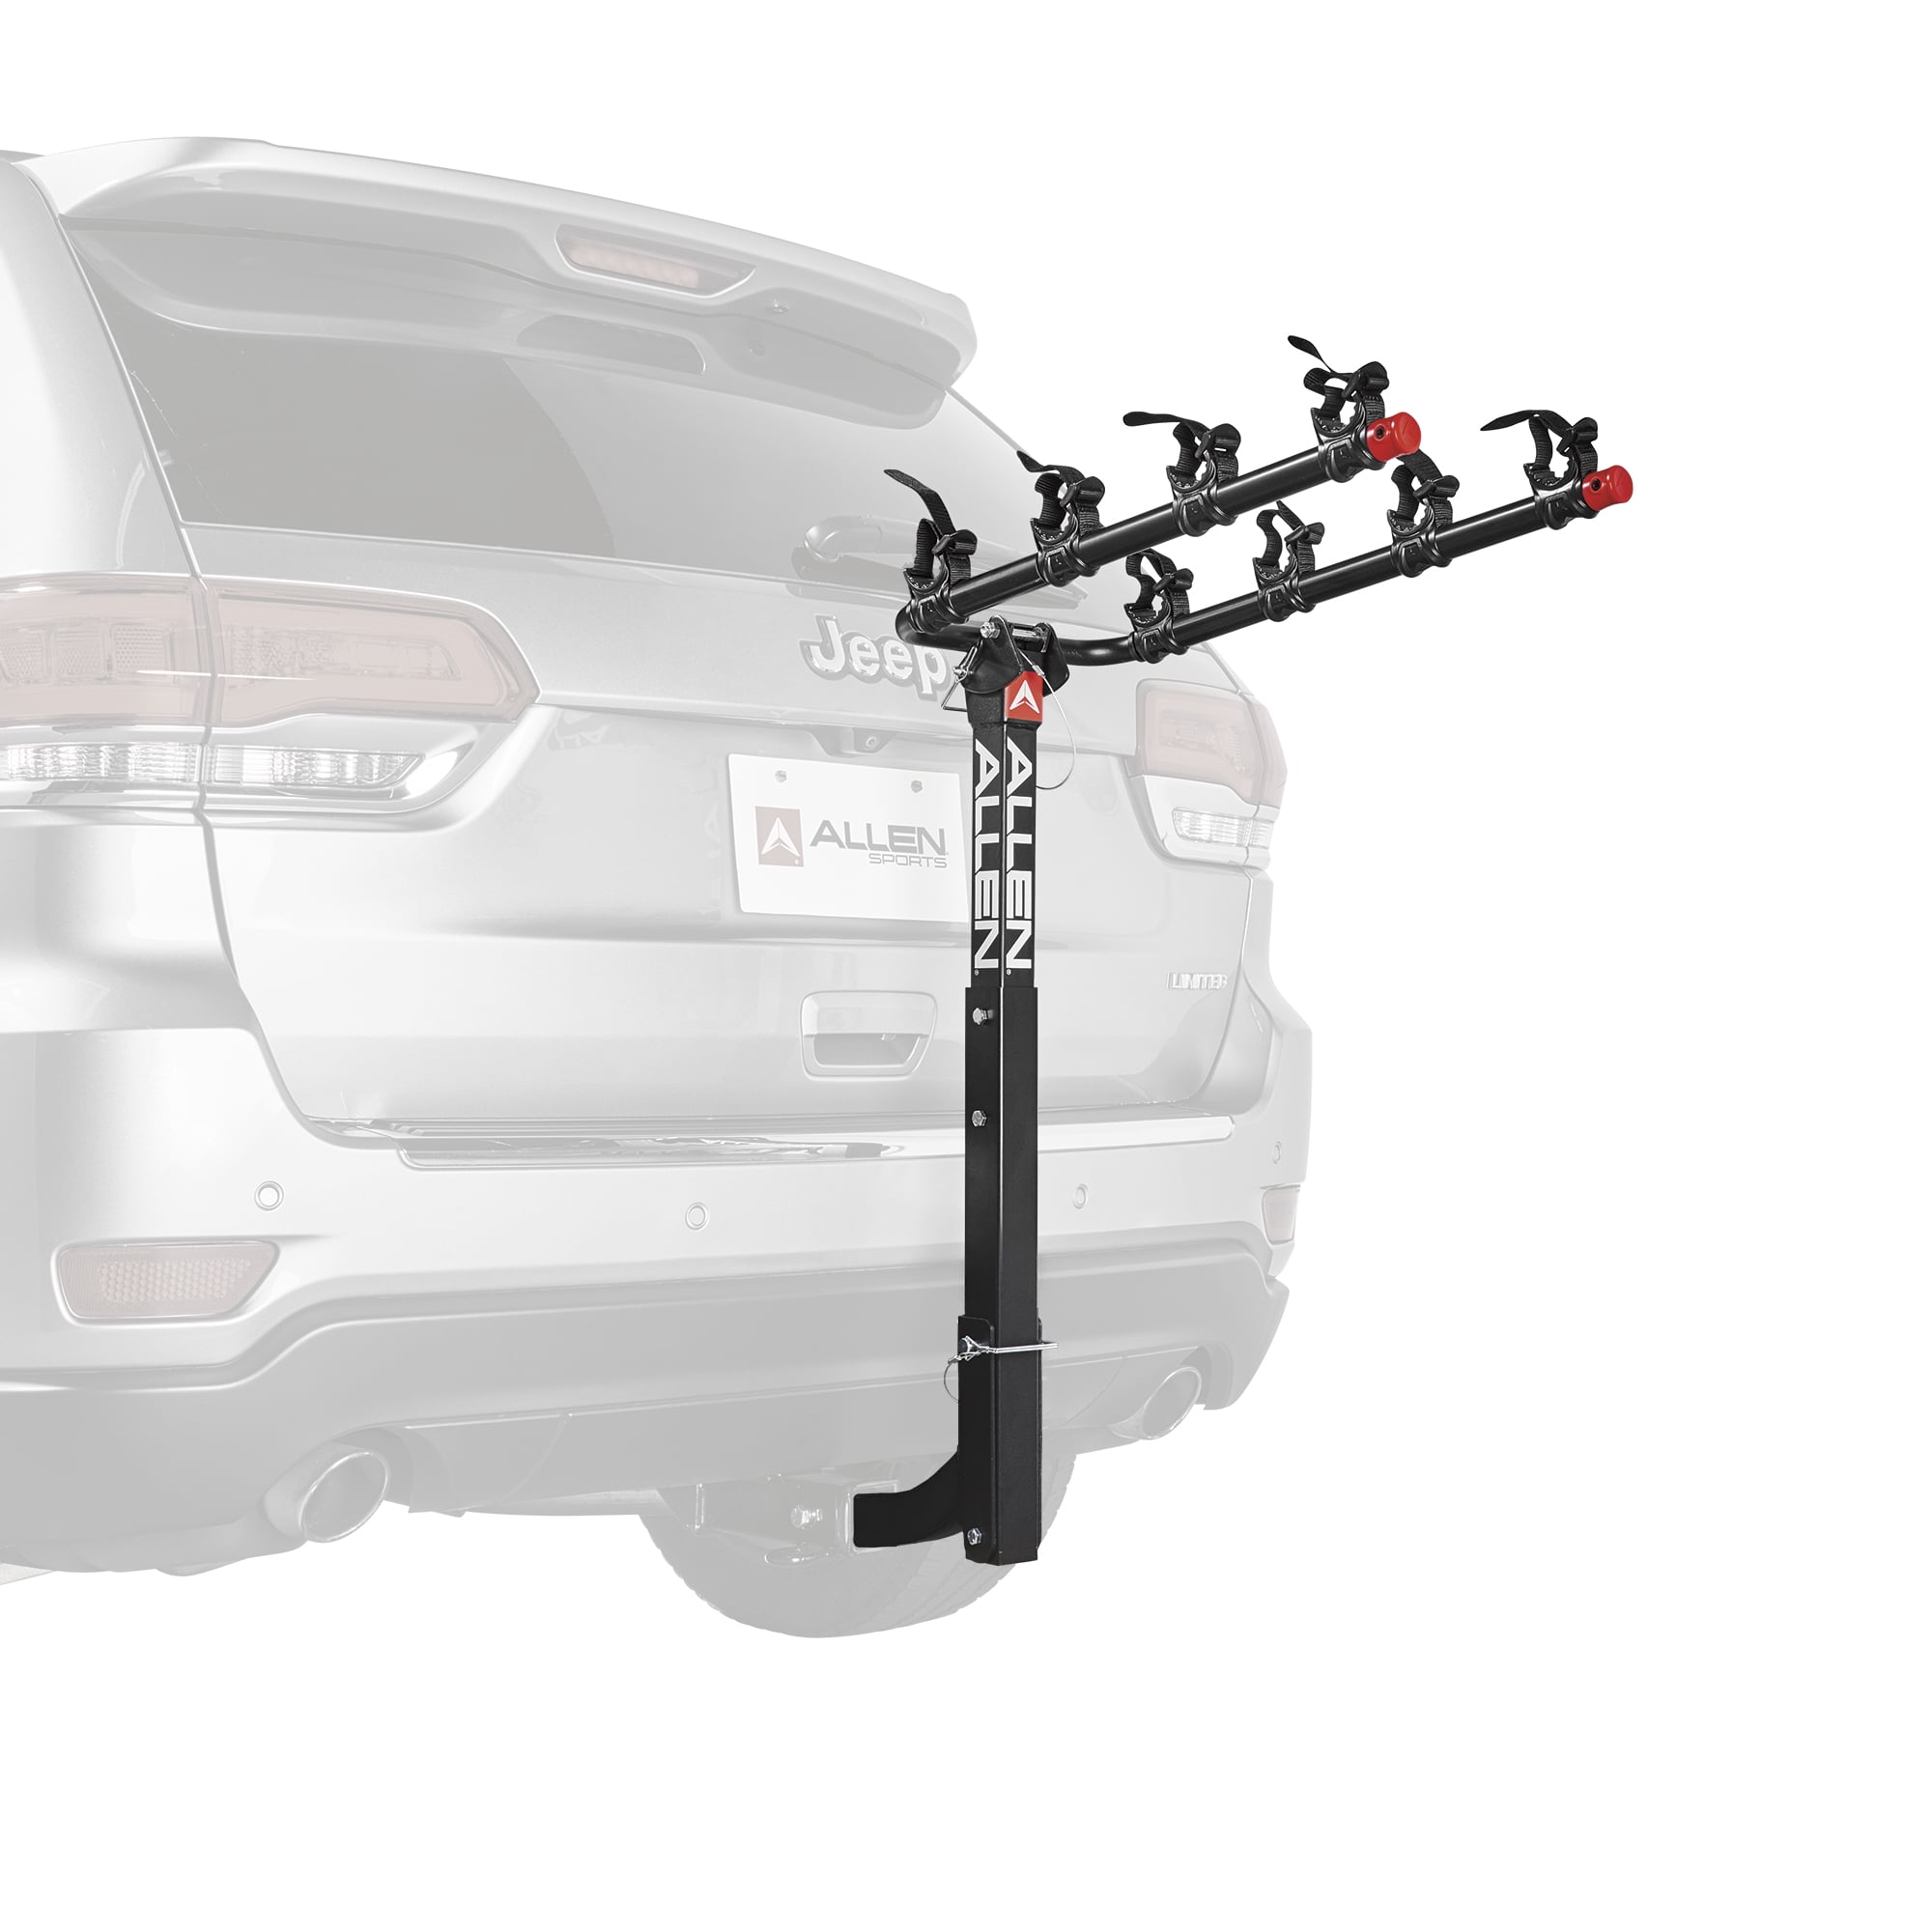 New 2 Bike Bicycle Carrier Hitch Receiver 2'' Heavy Duty Mount Rack Truck SUV US 